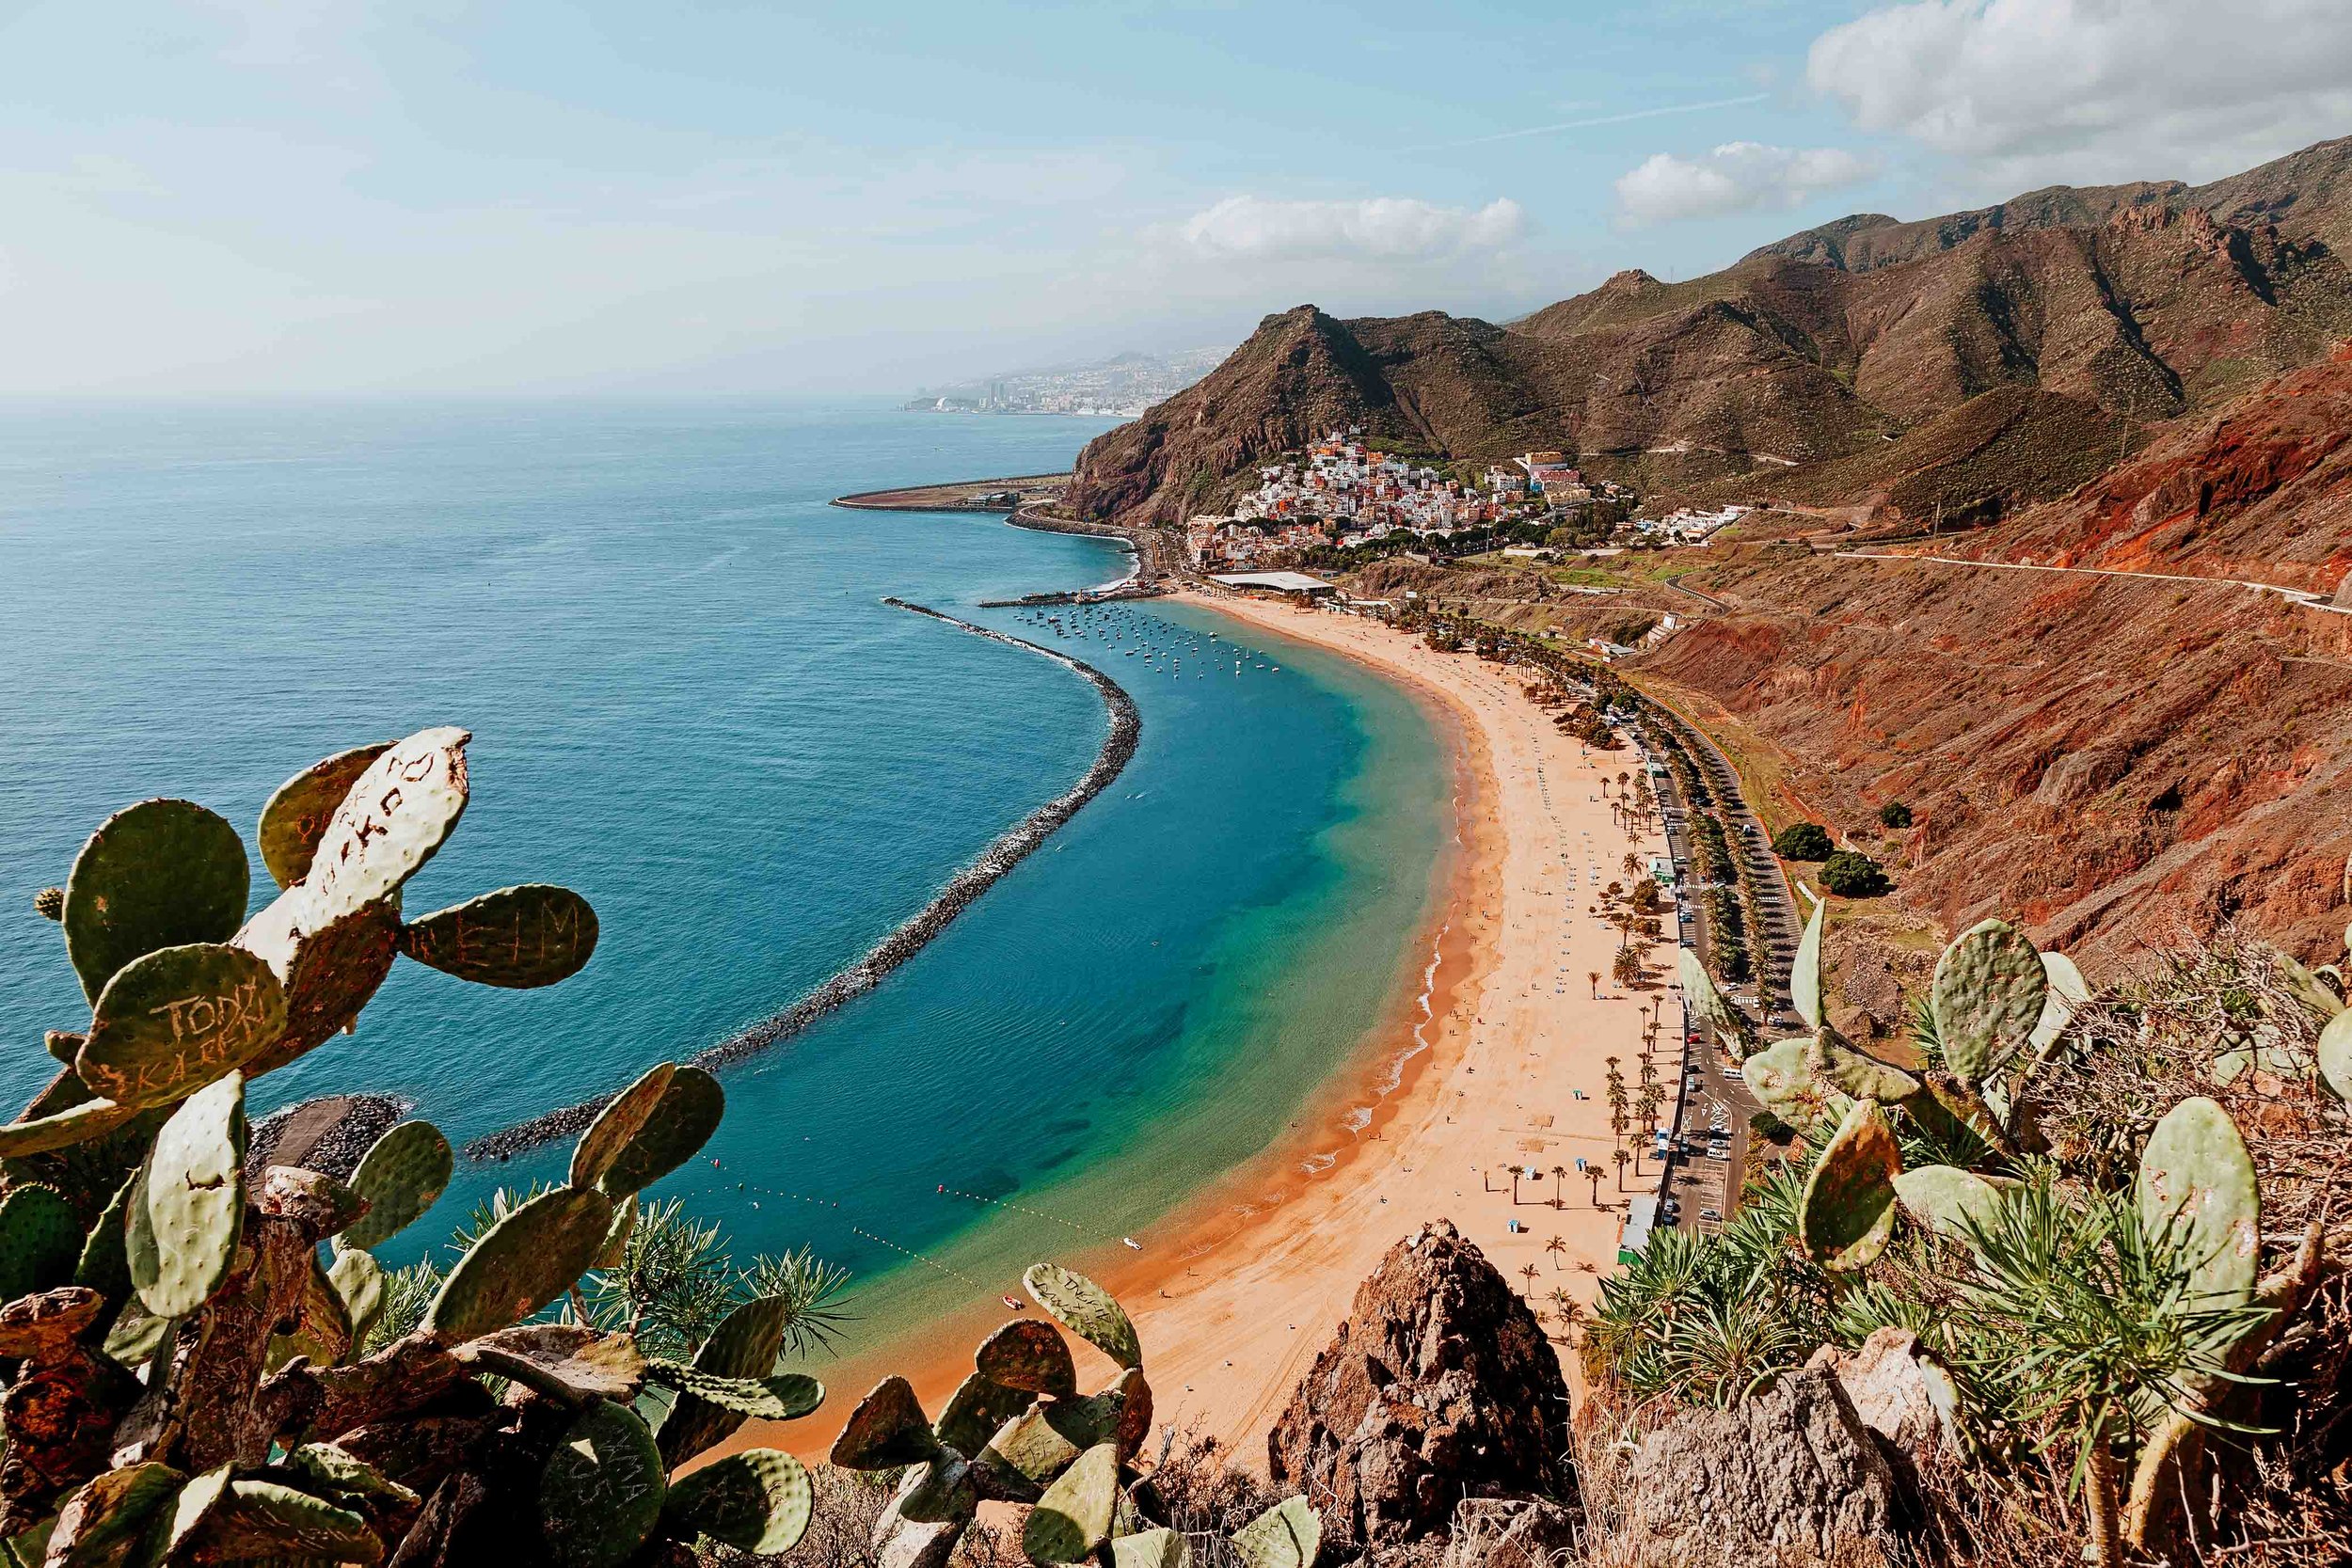 hottest island in canaries Las teresitas beach in tenerife which is the hottest canary island